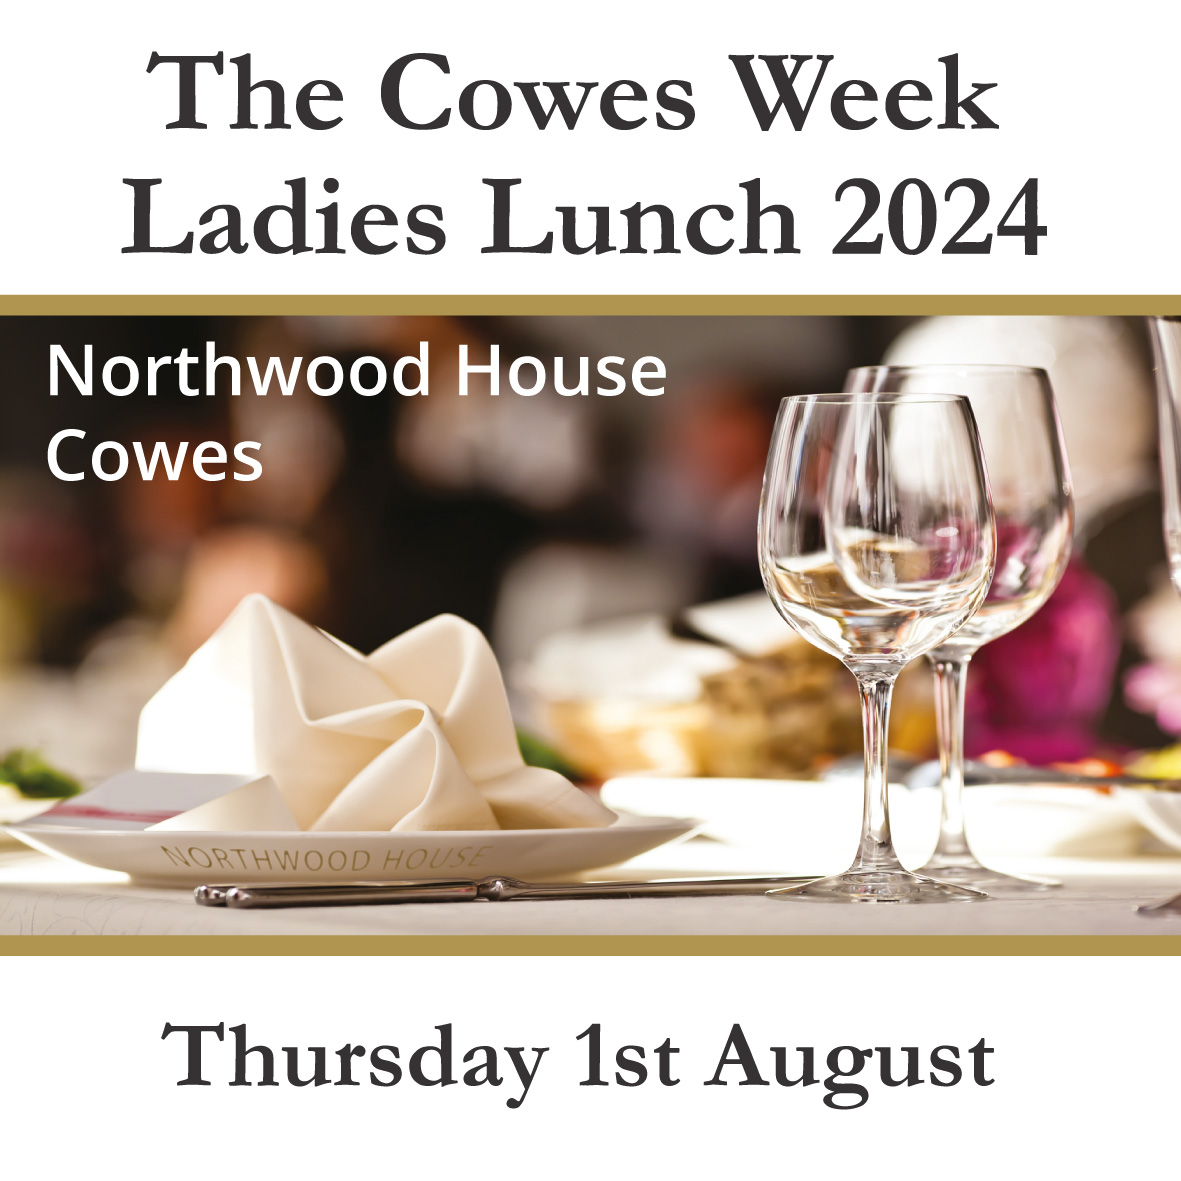 The 2024 Cowes Week Ladies Lunch-£42.50 (on sale from 1st May)